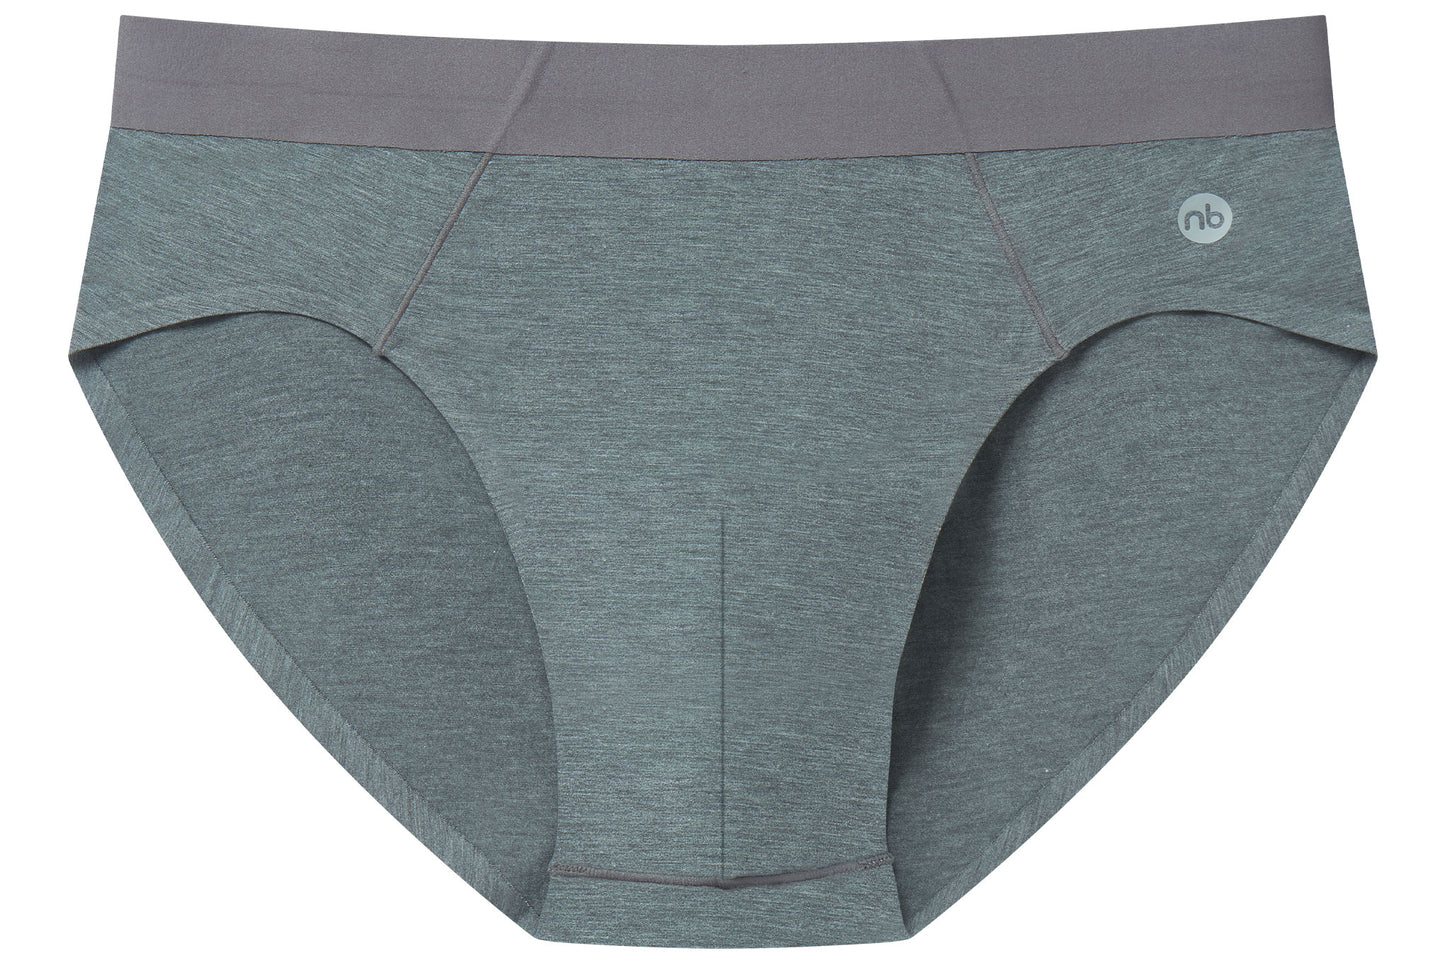 Men's Basics Briefs (Bamboo Spandex, 2 Pack) - Charcoal And Grey